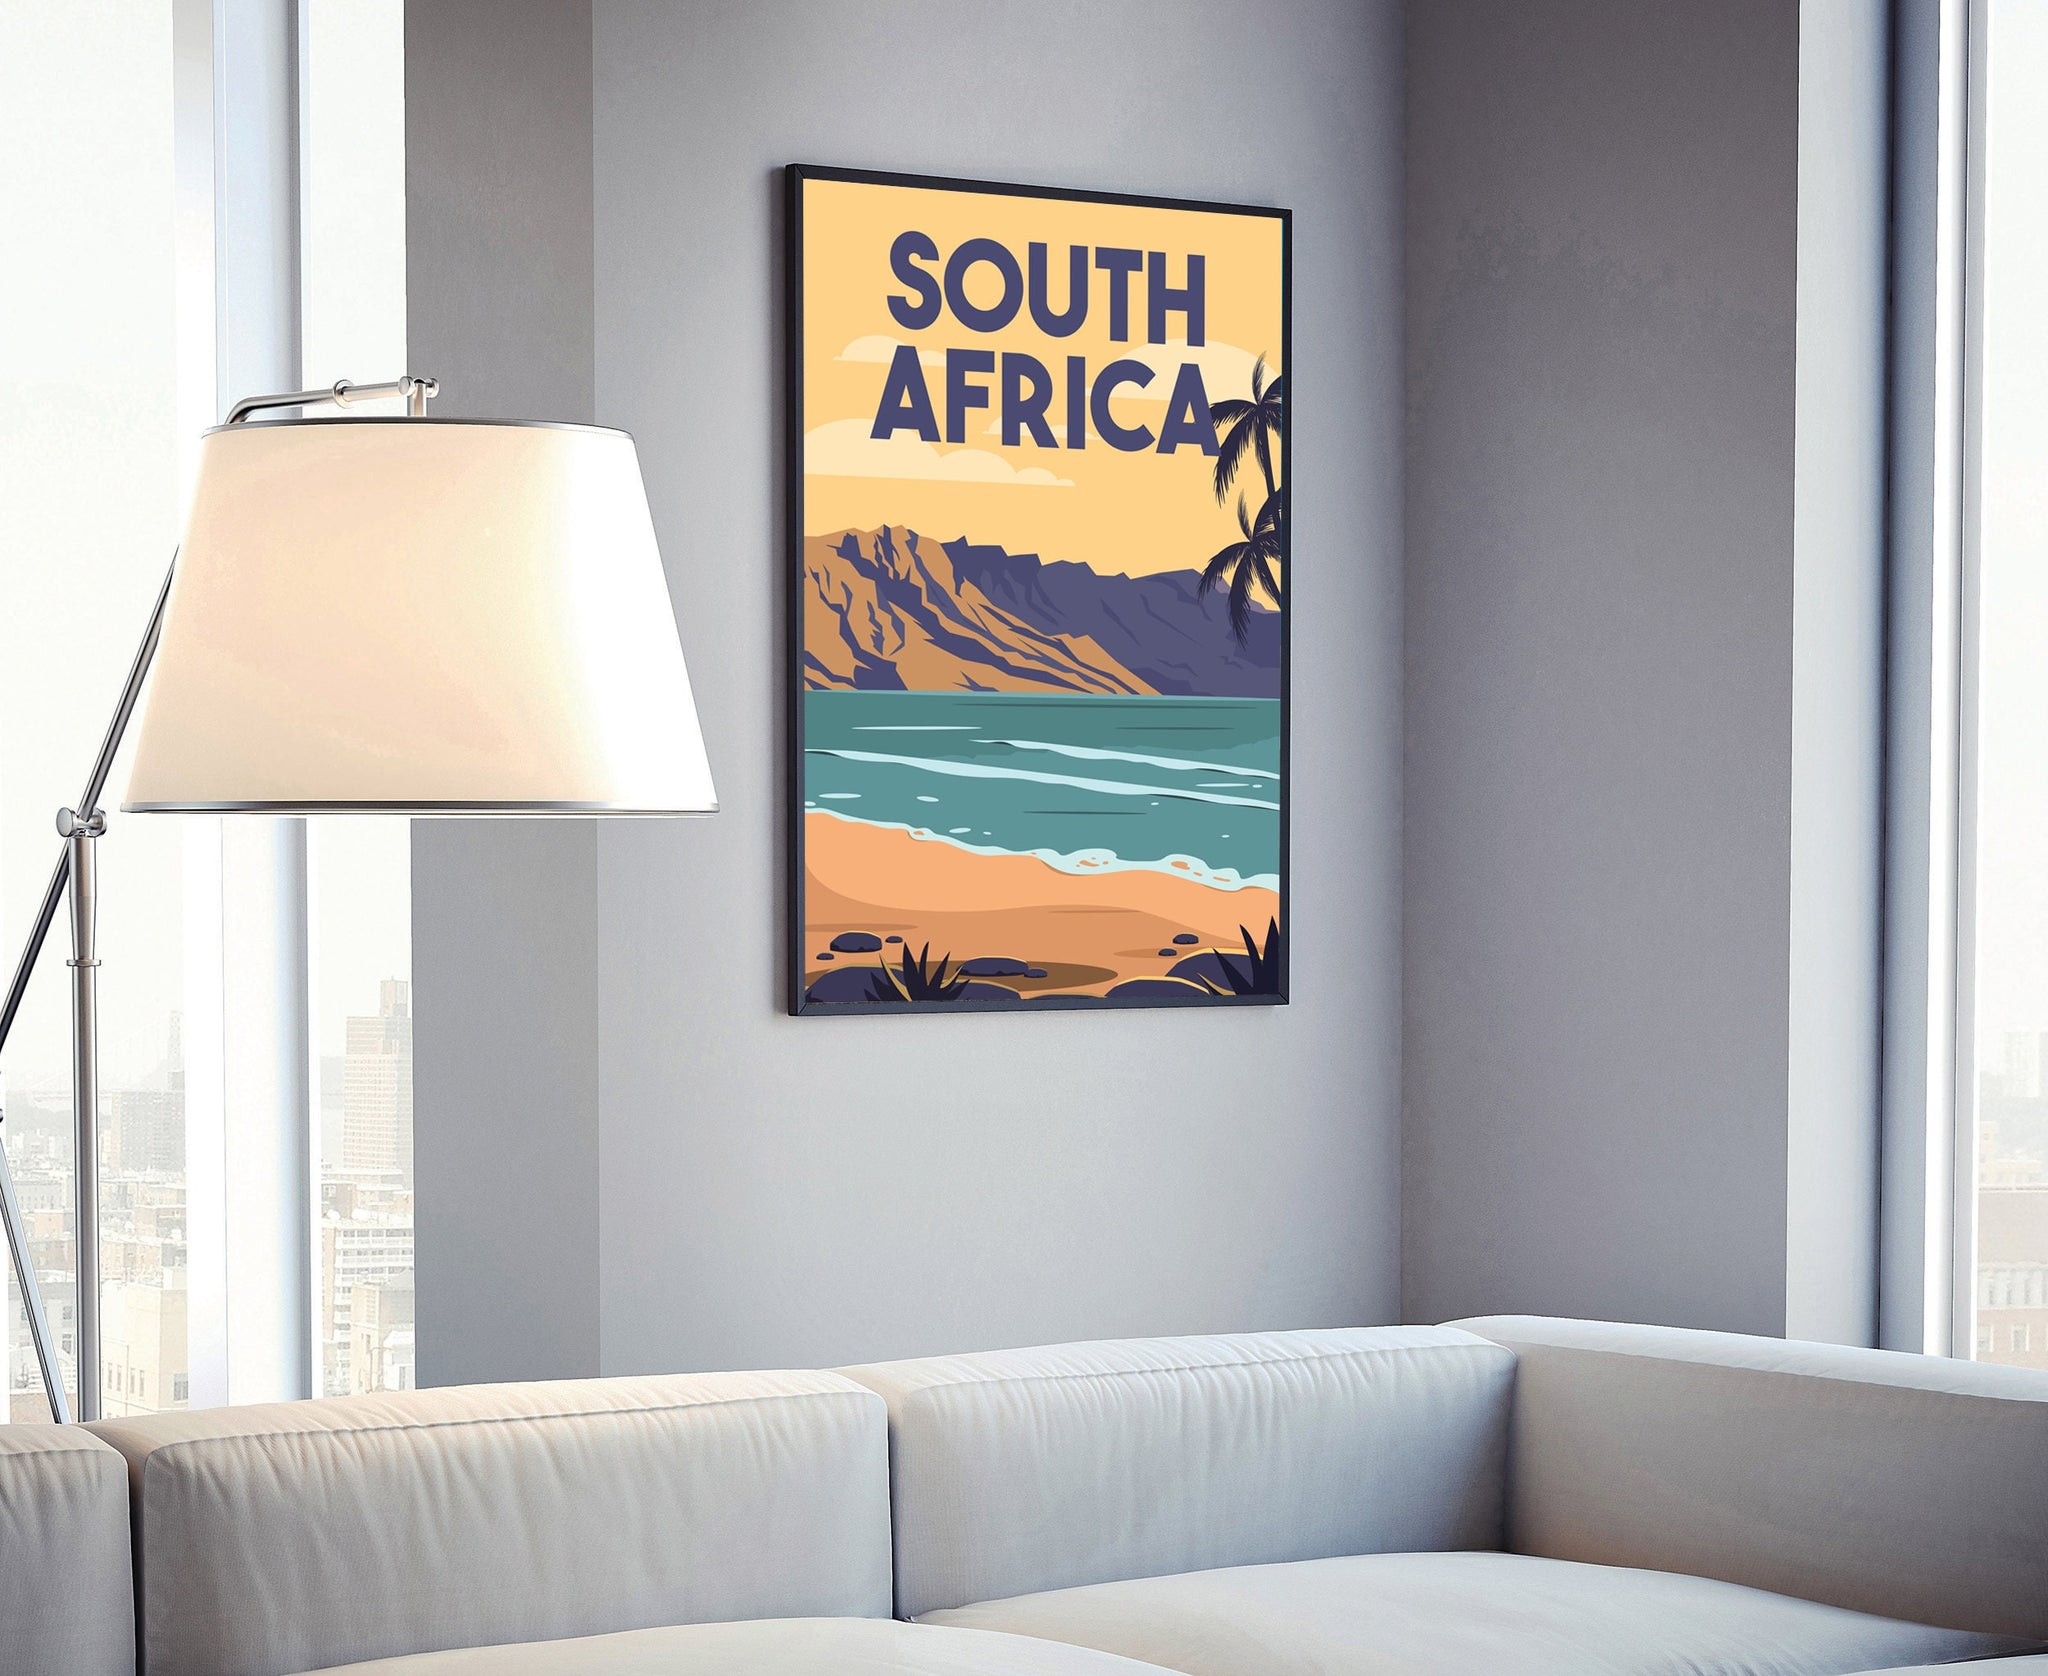 South Africa Vintage Rustic Poster Print, Retro Style Travel Poster Print